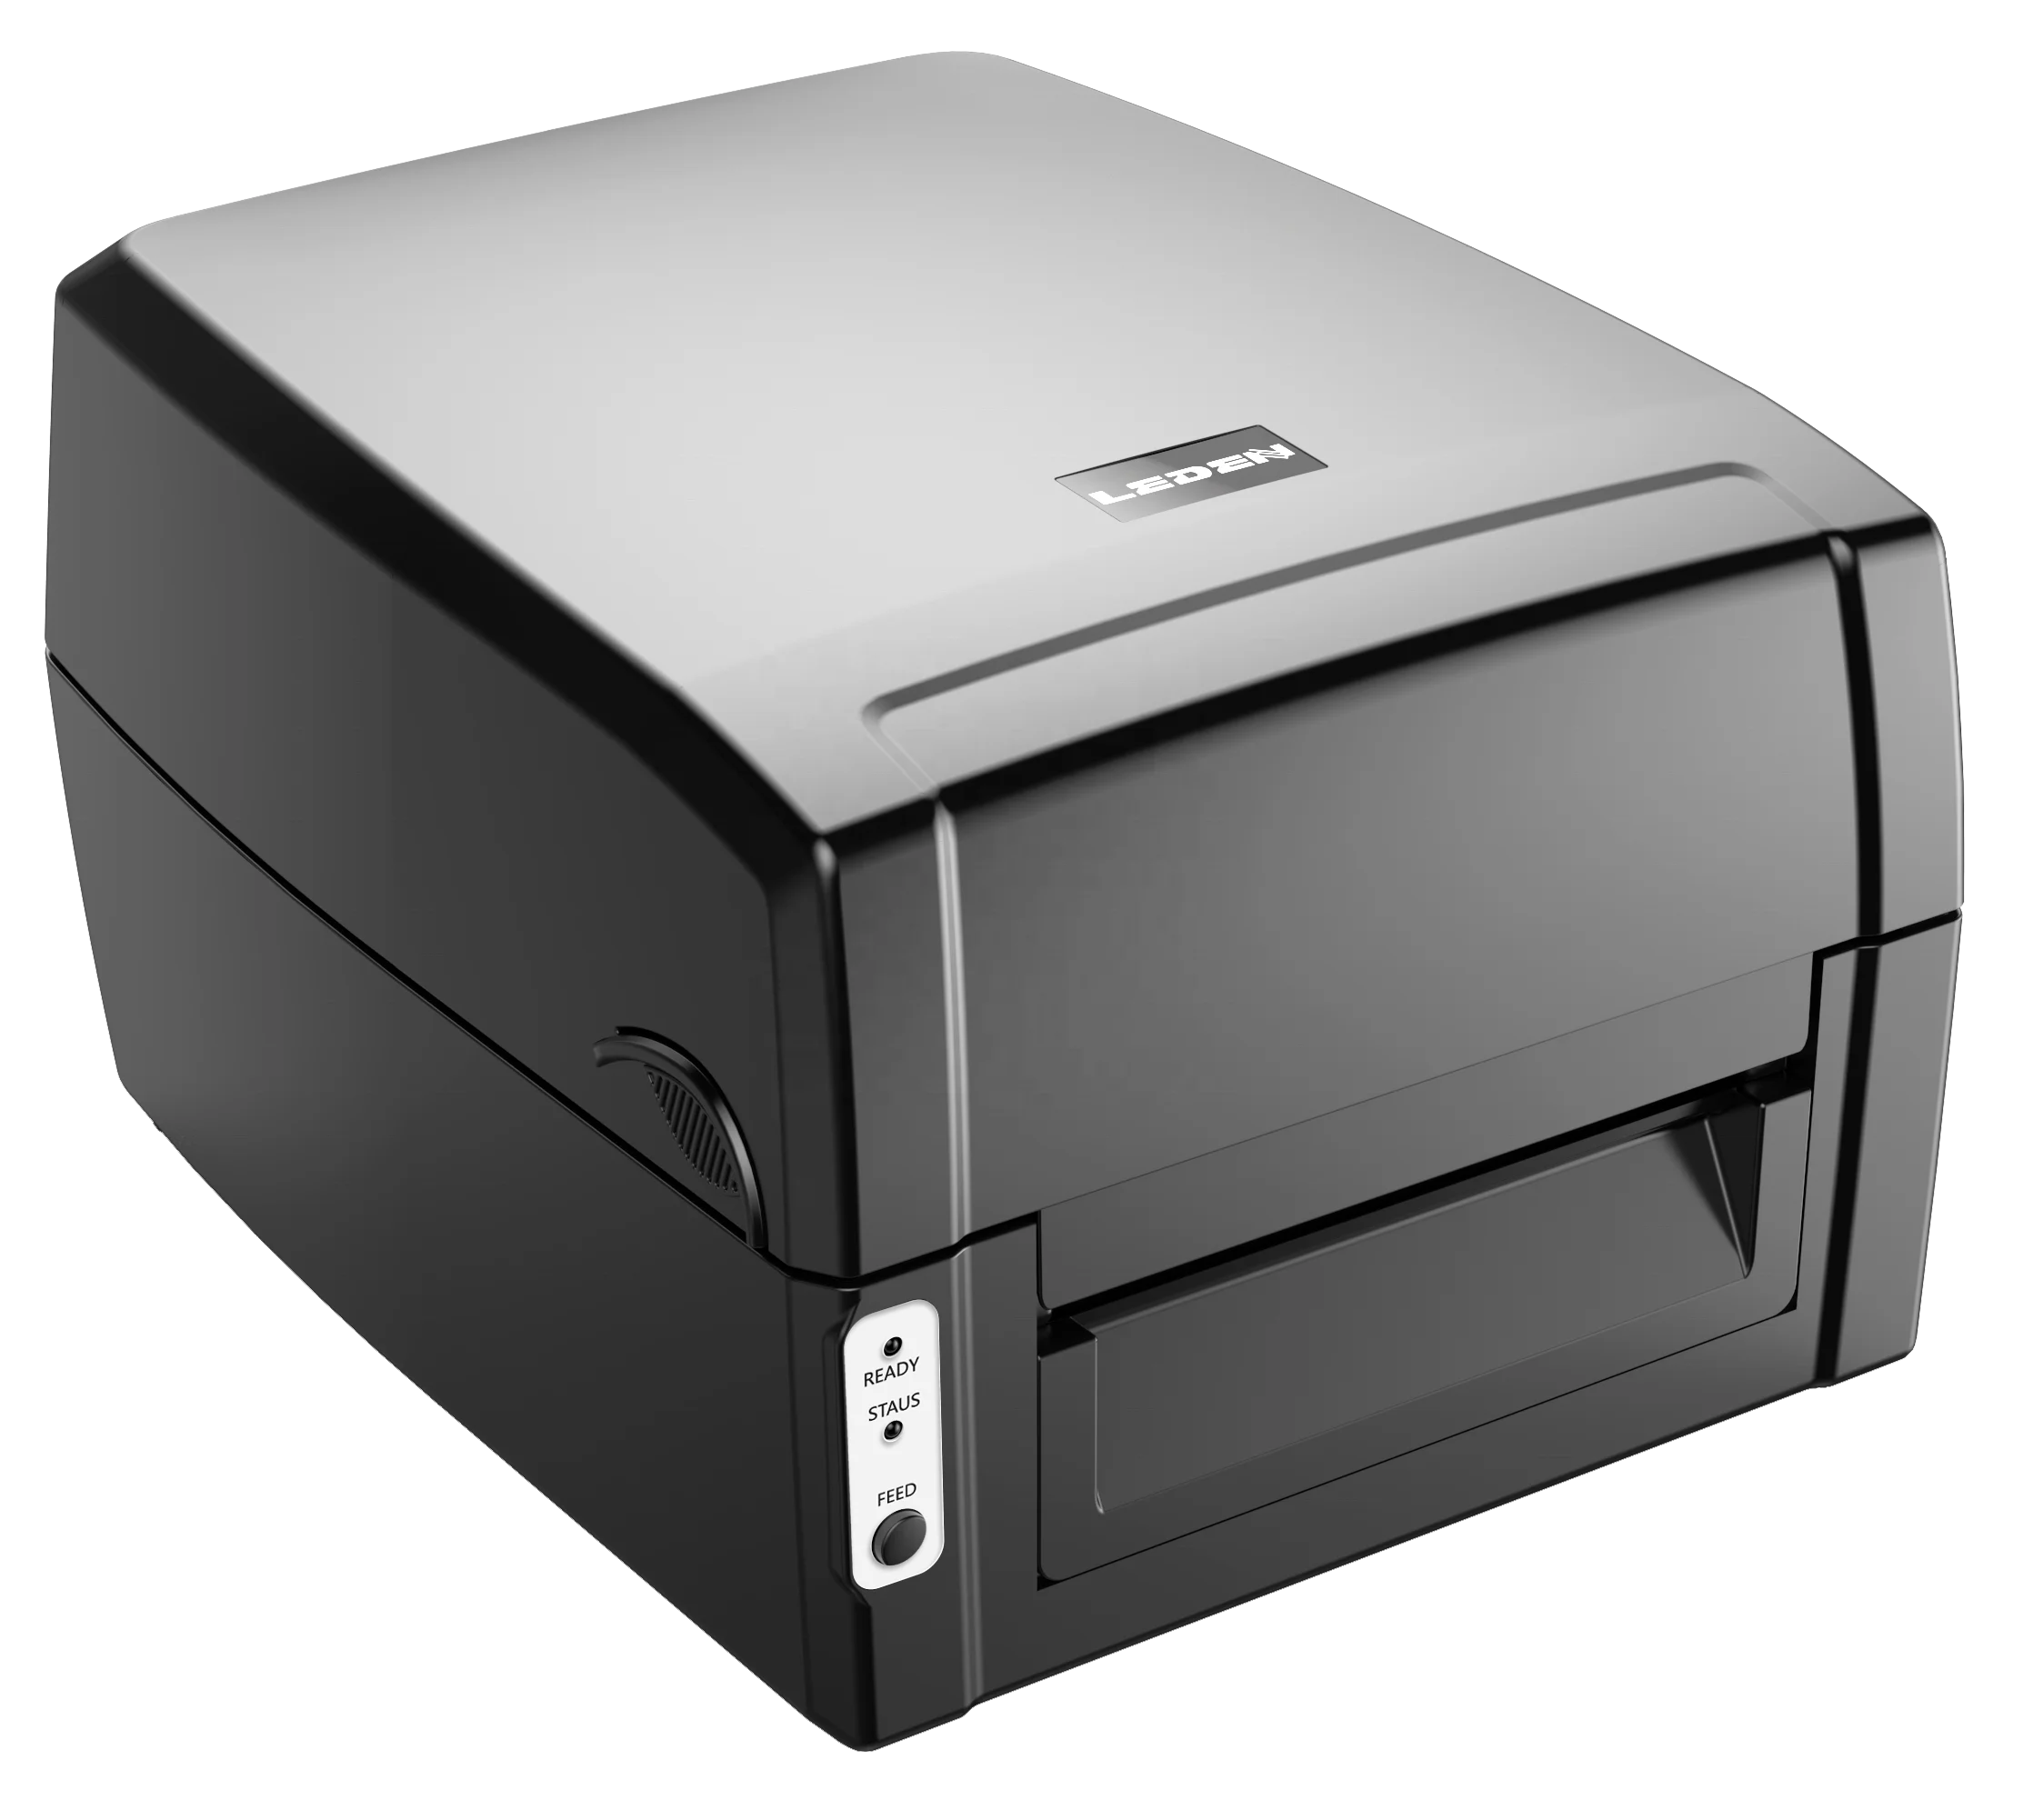 

Premium Desktop Thermal Printer for Shipping Labels, Compatible with Etsy, eBay, Amazon - Barcode Printer - 4x6 Printer